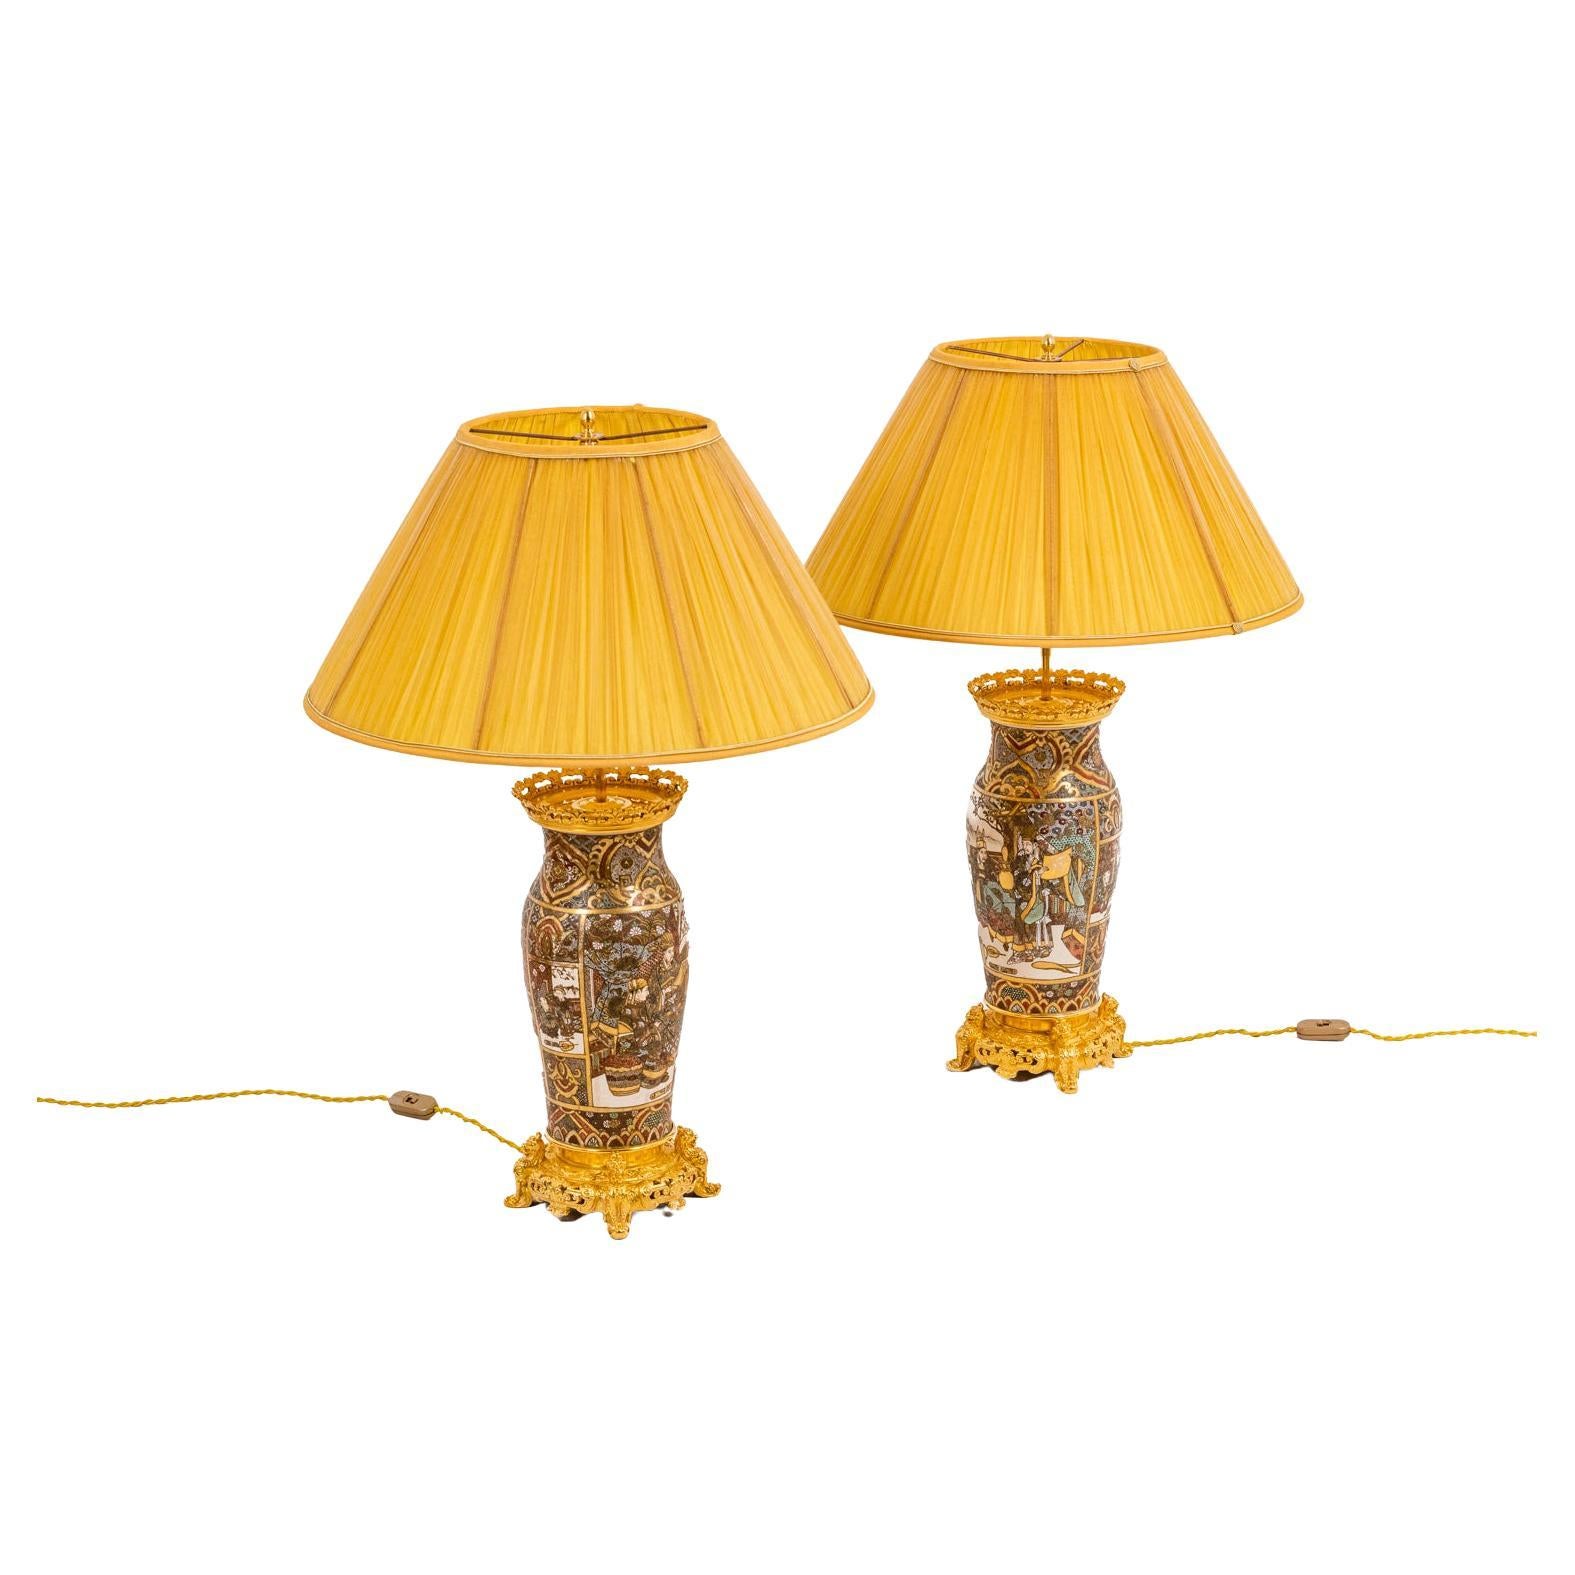 Pair of Lamps in Satsuma Earthenware and Gilt Bronze, circa 1880 For Sale